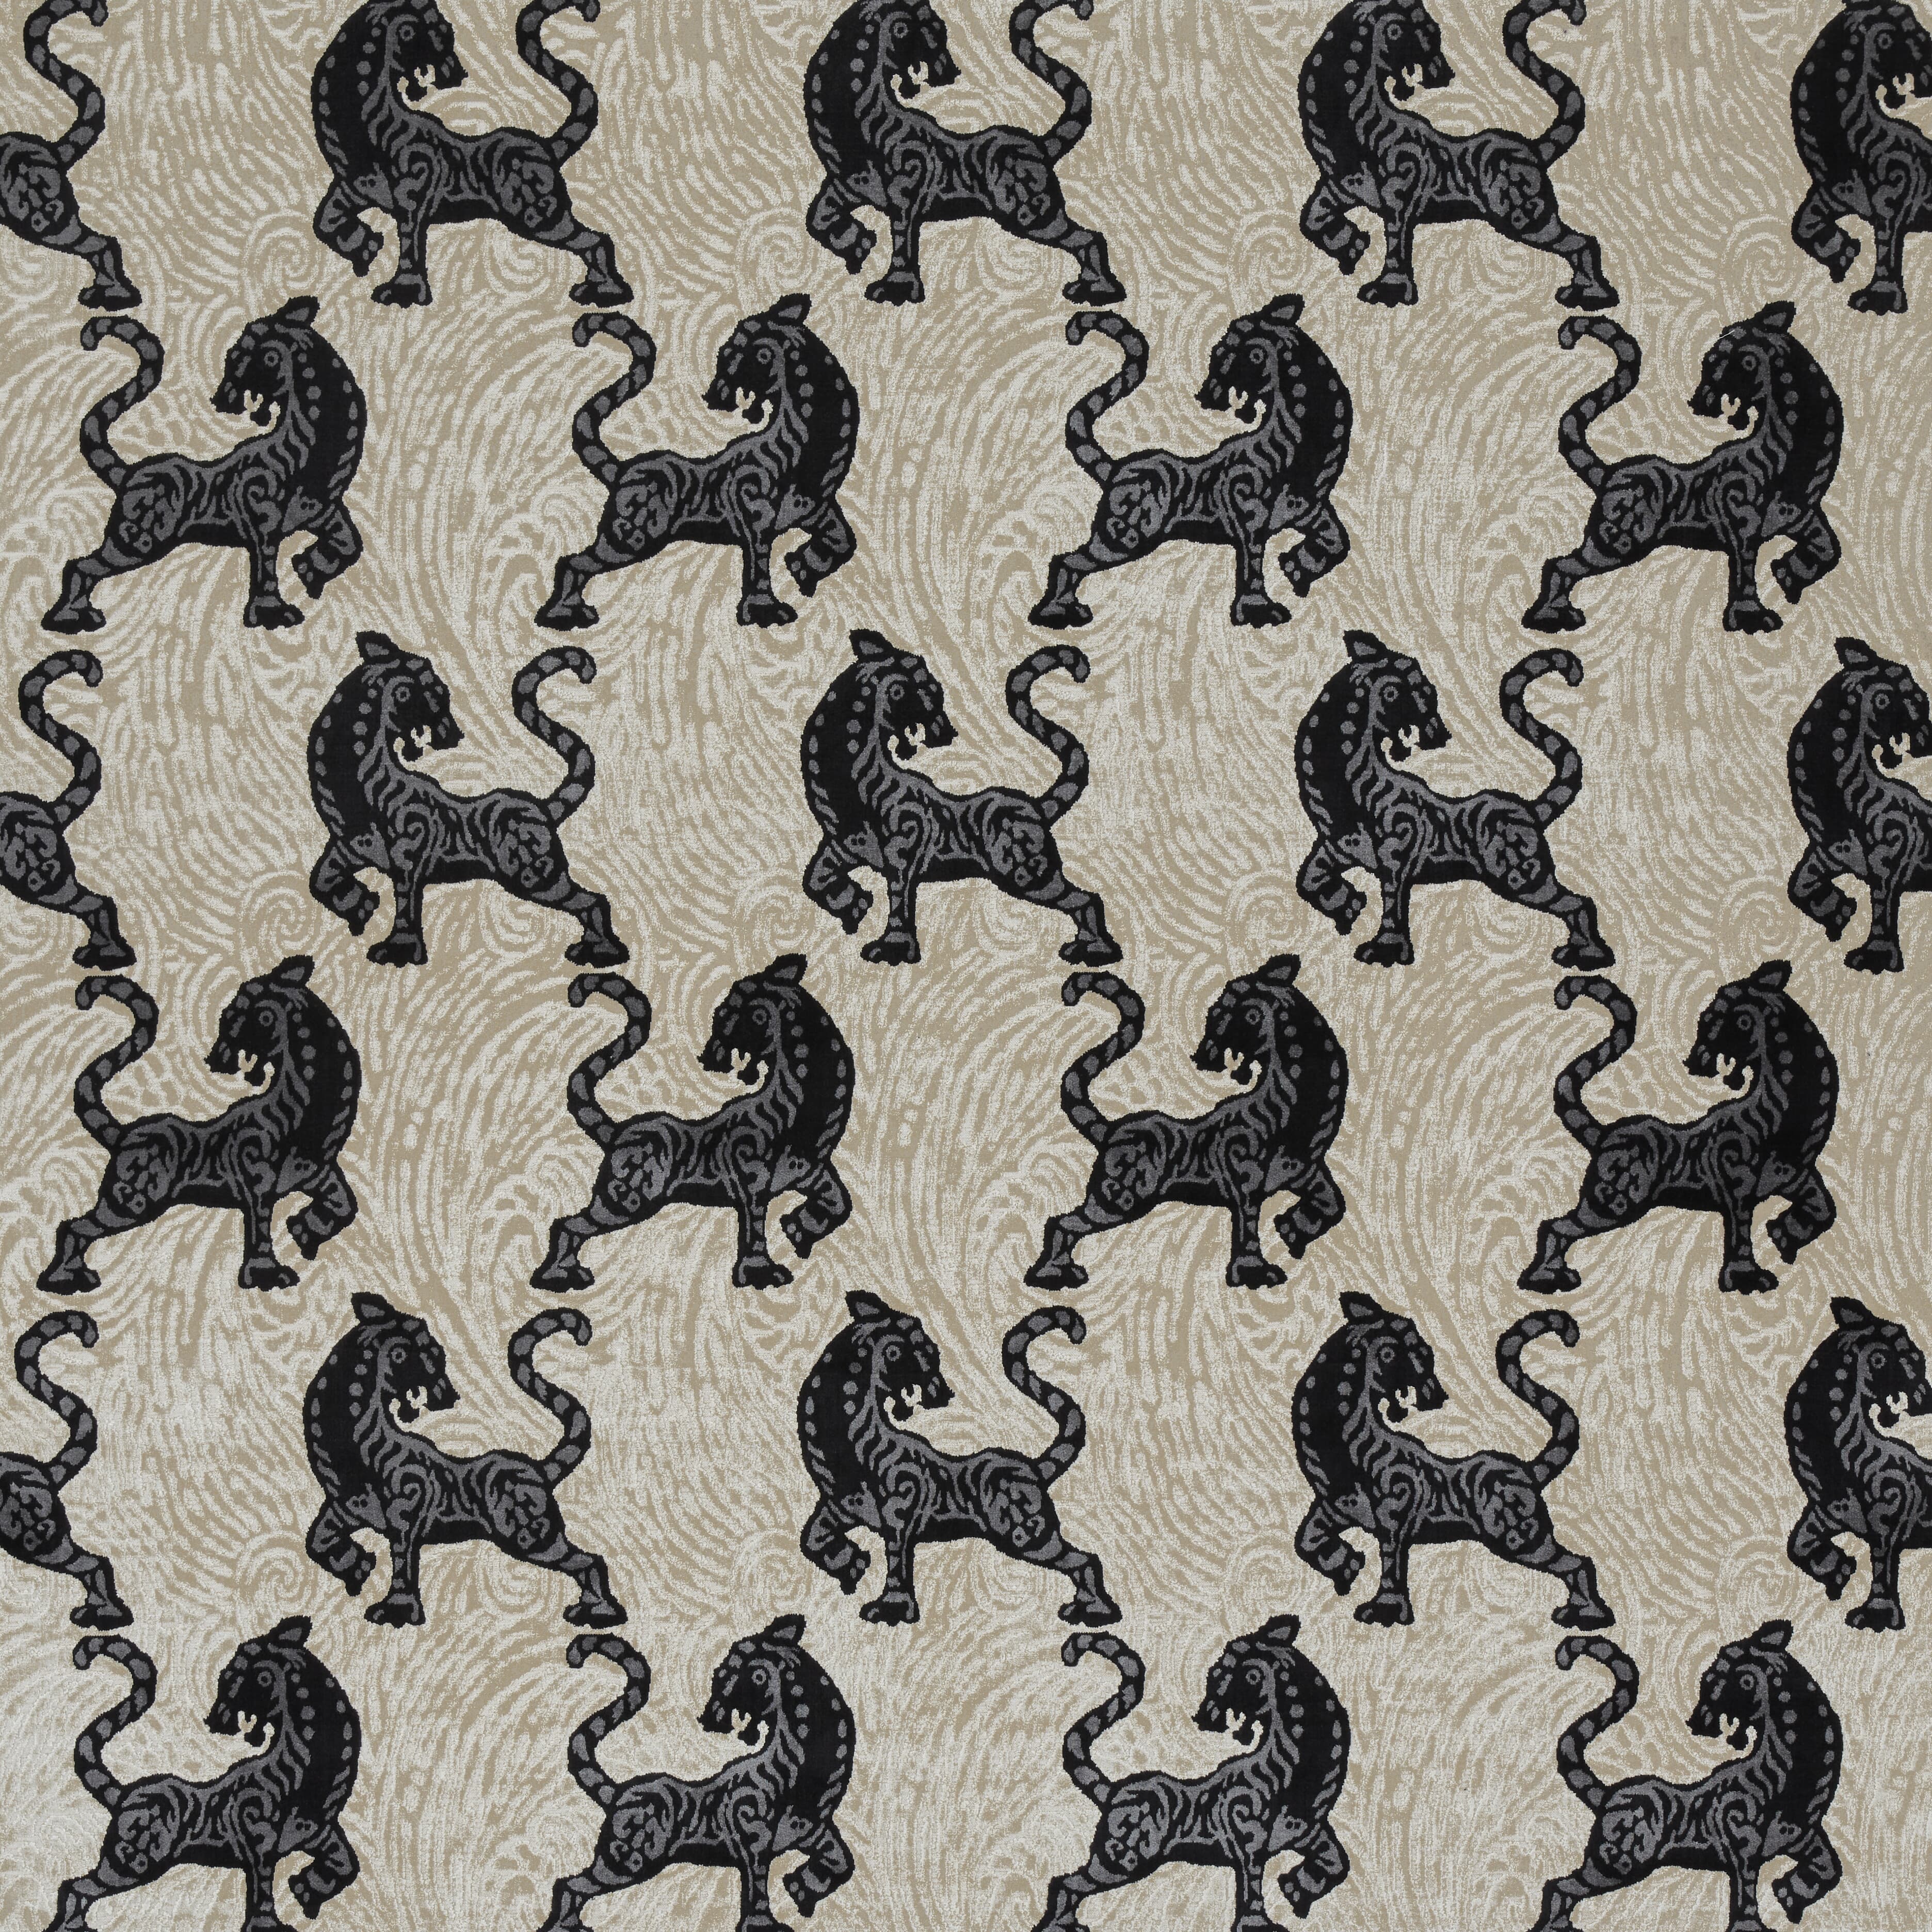 Africa 2 Black/tan by Stout Fabric